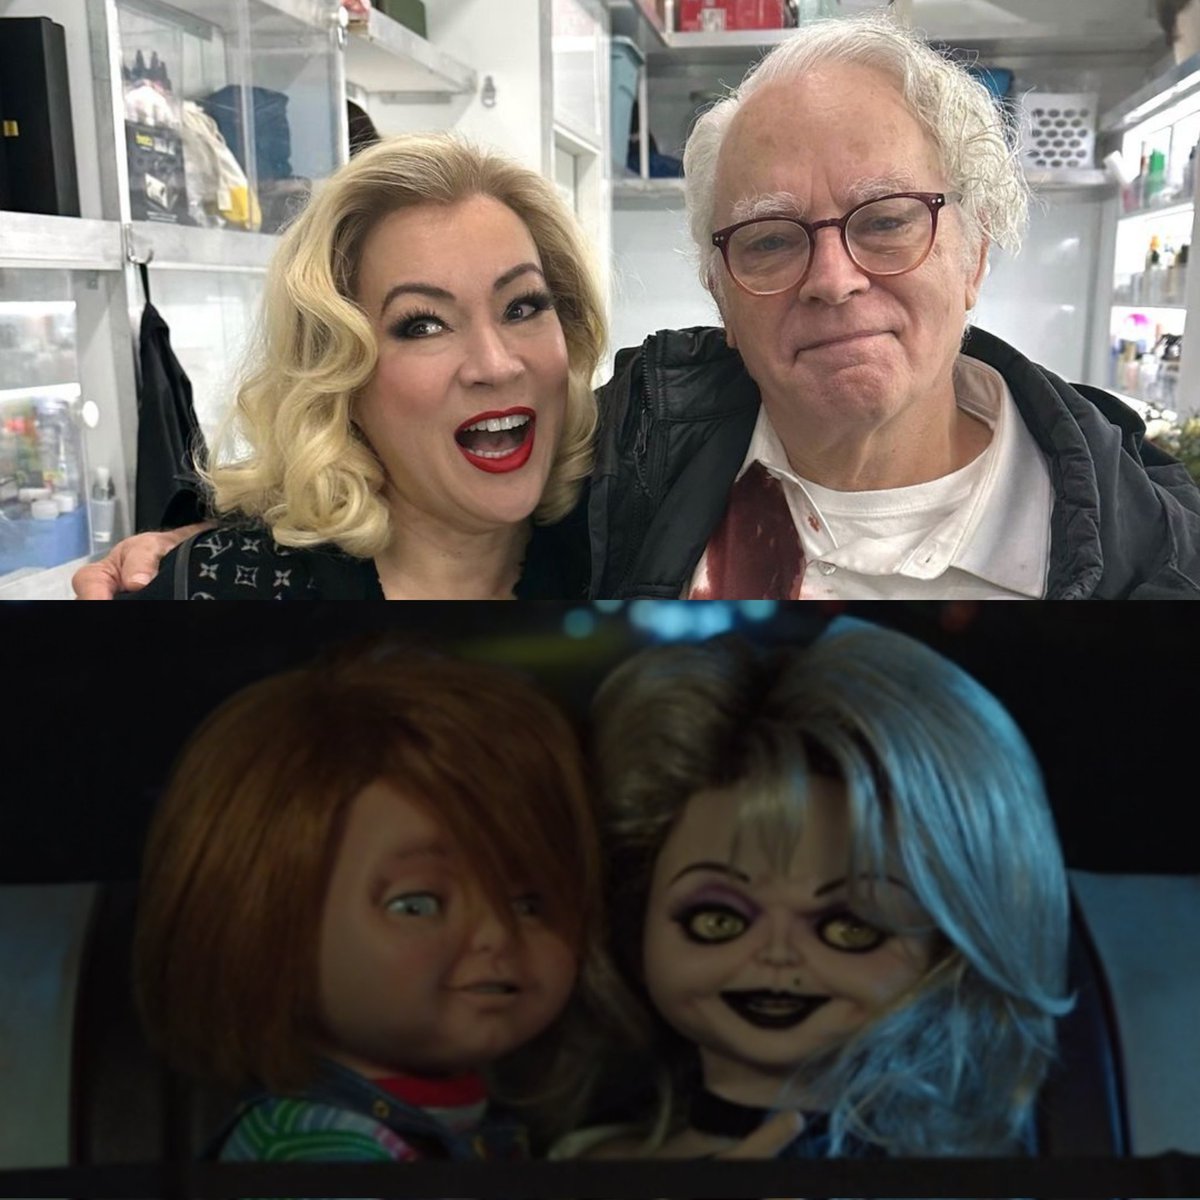 When you realize this is the second time @JenniferTilly and #BradDourif were physically on set together but didn't share any scenes in their human bodies😩💔 (First time happened in Curse) #Chucky #ChuckySeason3